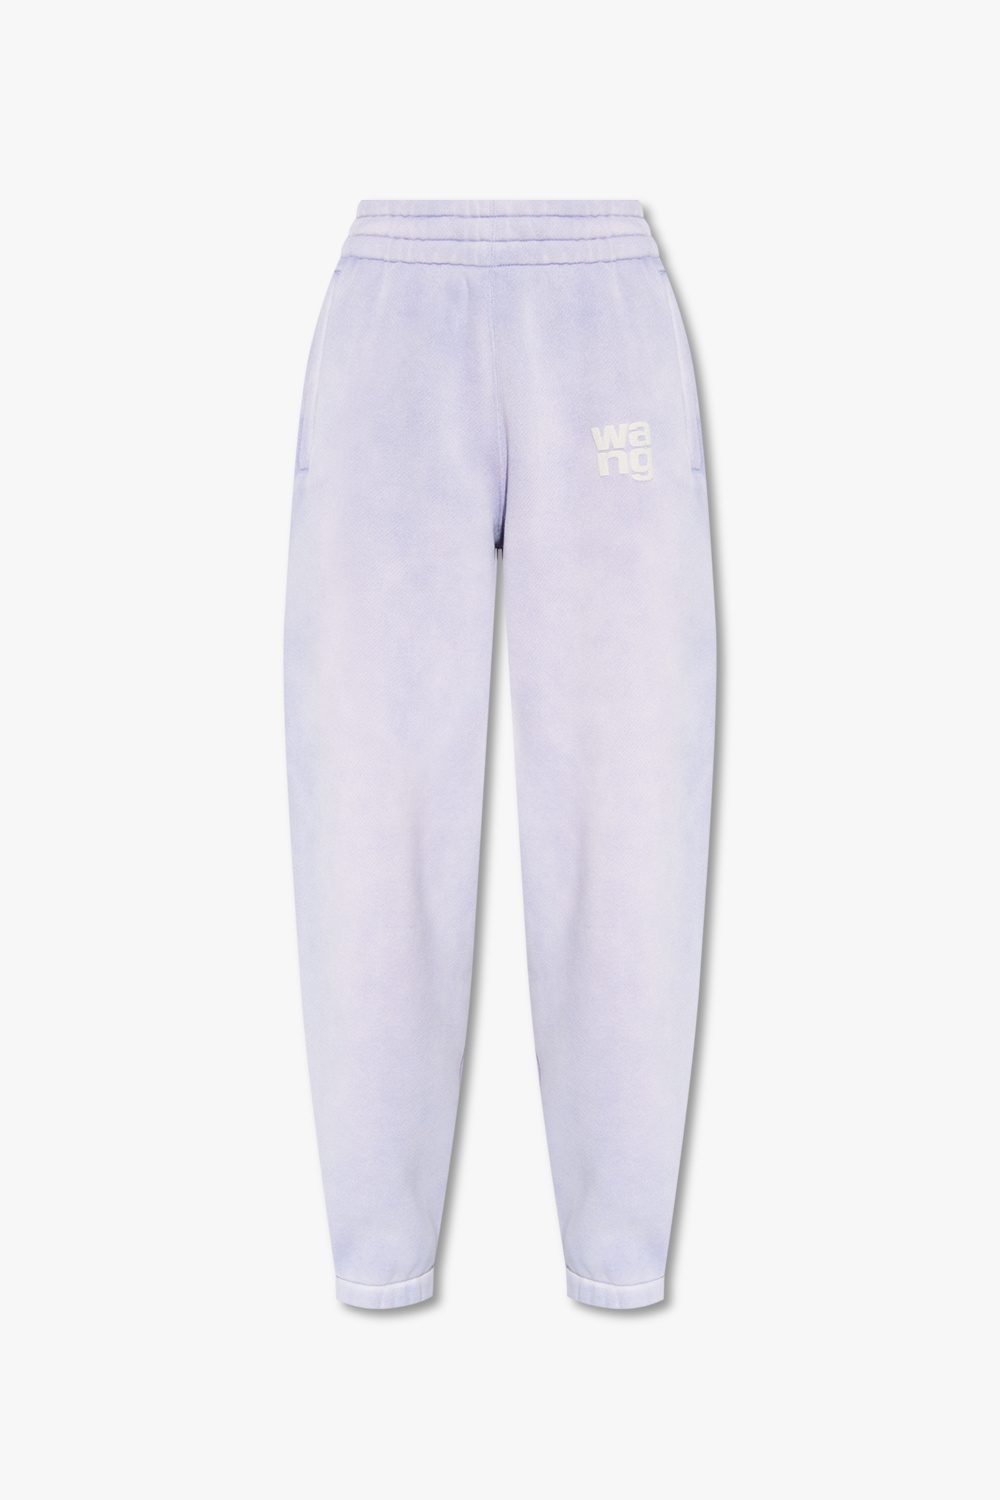 Purple Sweatpants with logo T by Alexander Wang - Leggings The